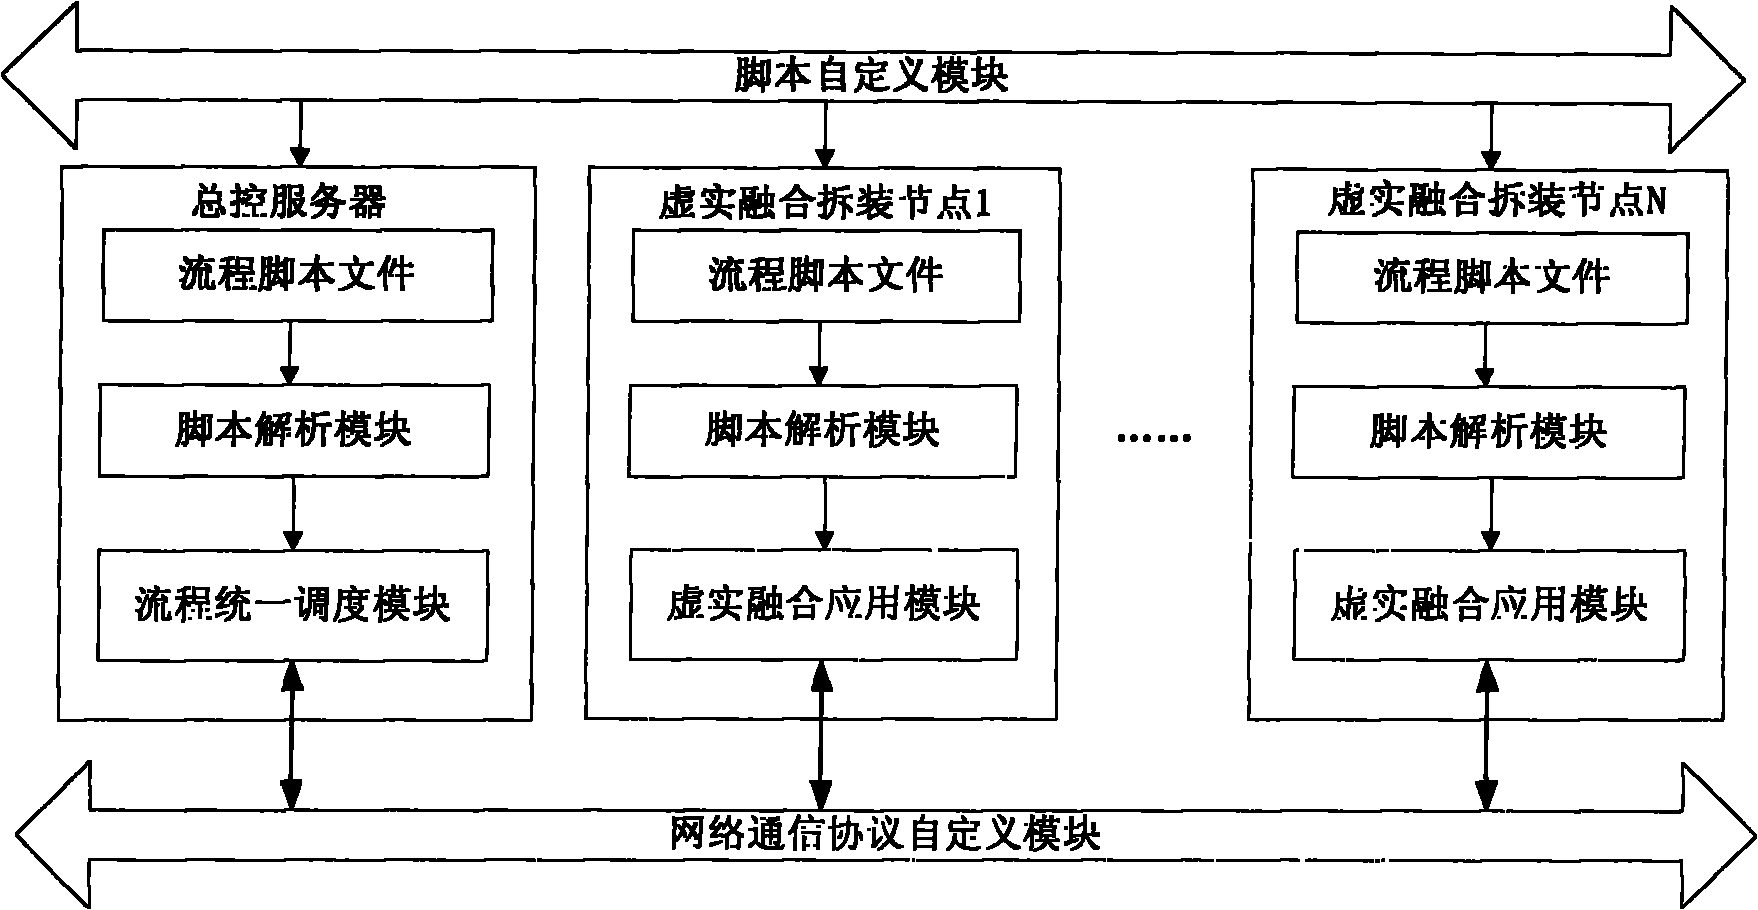 Multi-person collaborative virtual-real mixed disassembly and assembly system and multi-person collaborative virtual-real mixed disassembly and assembly method